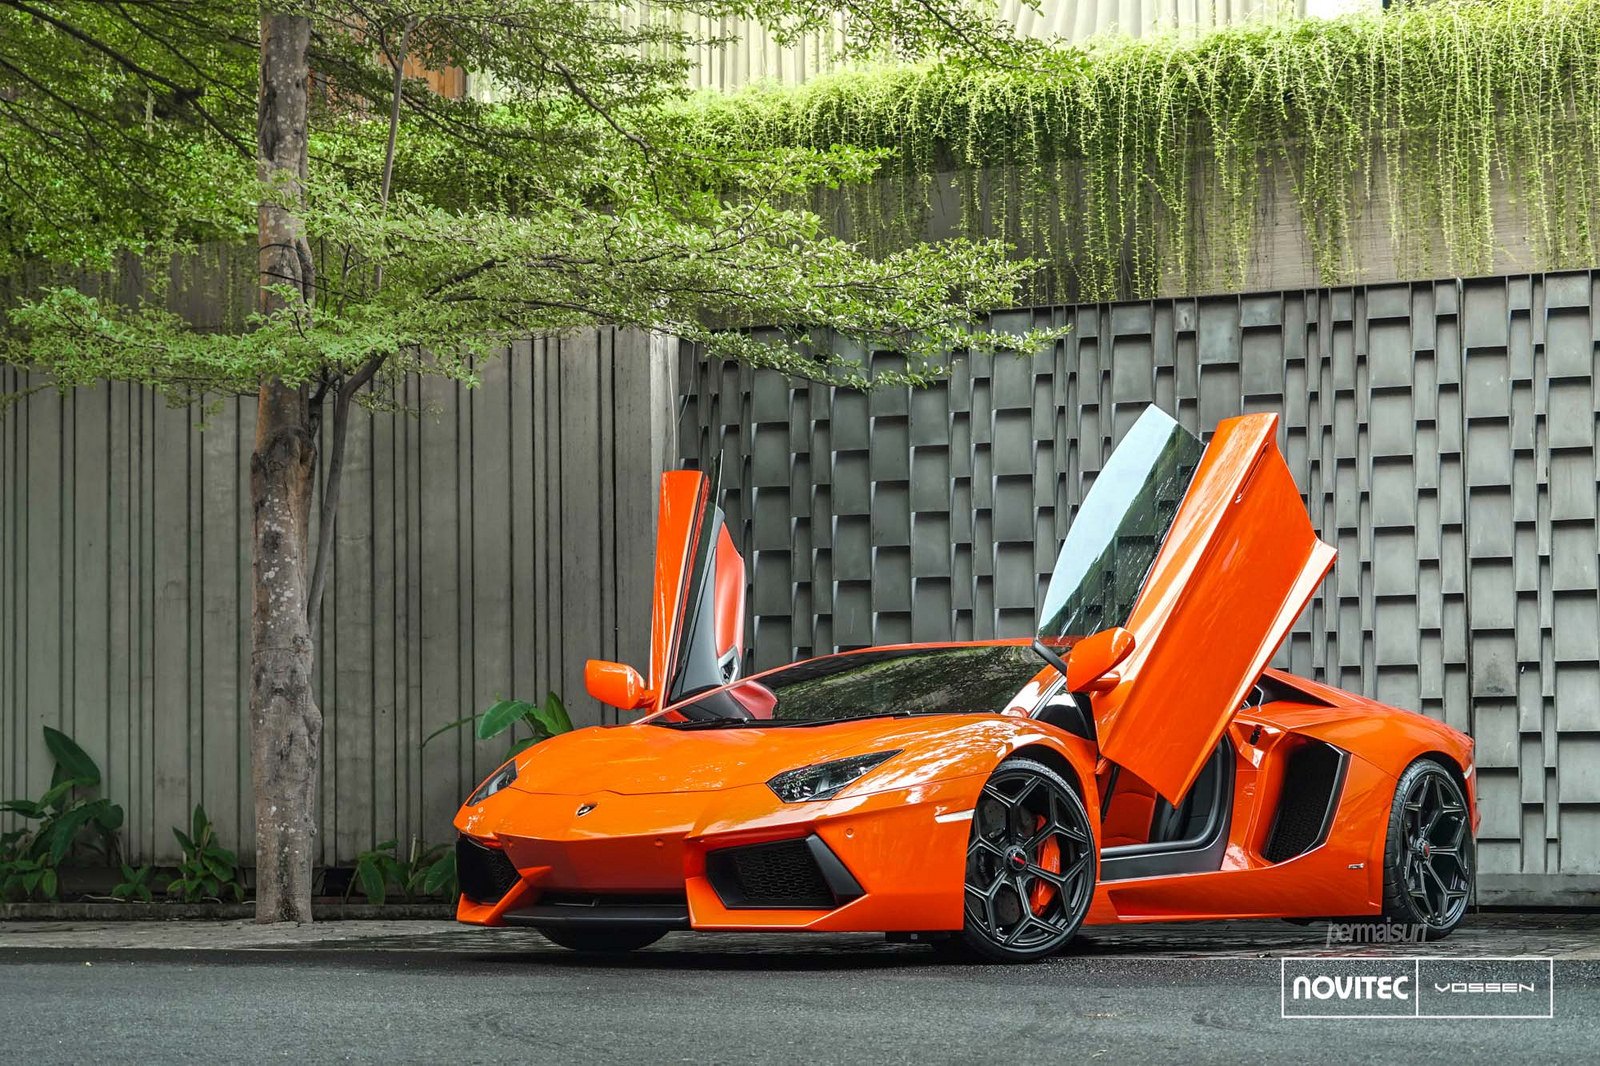 Exotic Styling Of Lamborghini Aventador Accentuated With Black Elements — Gallery